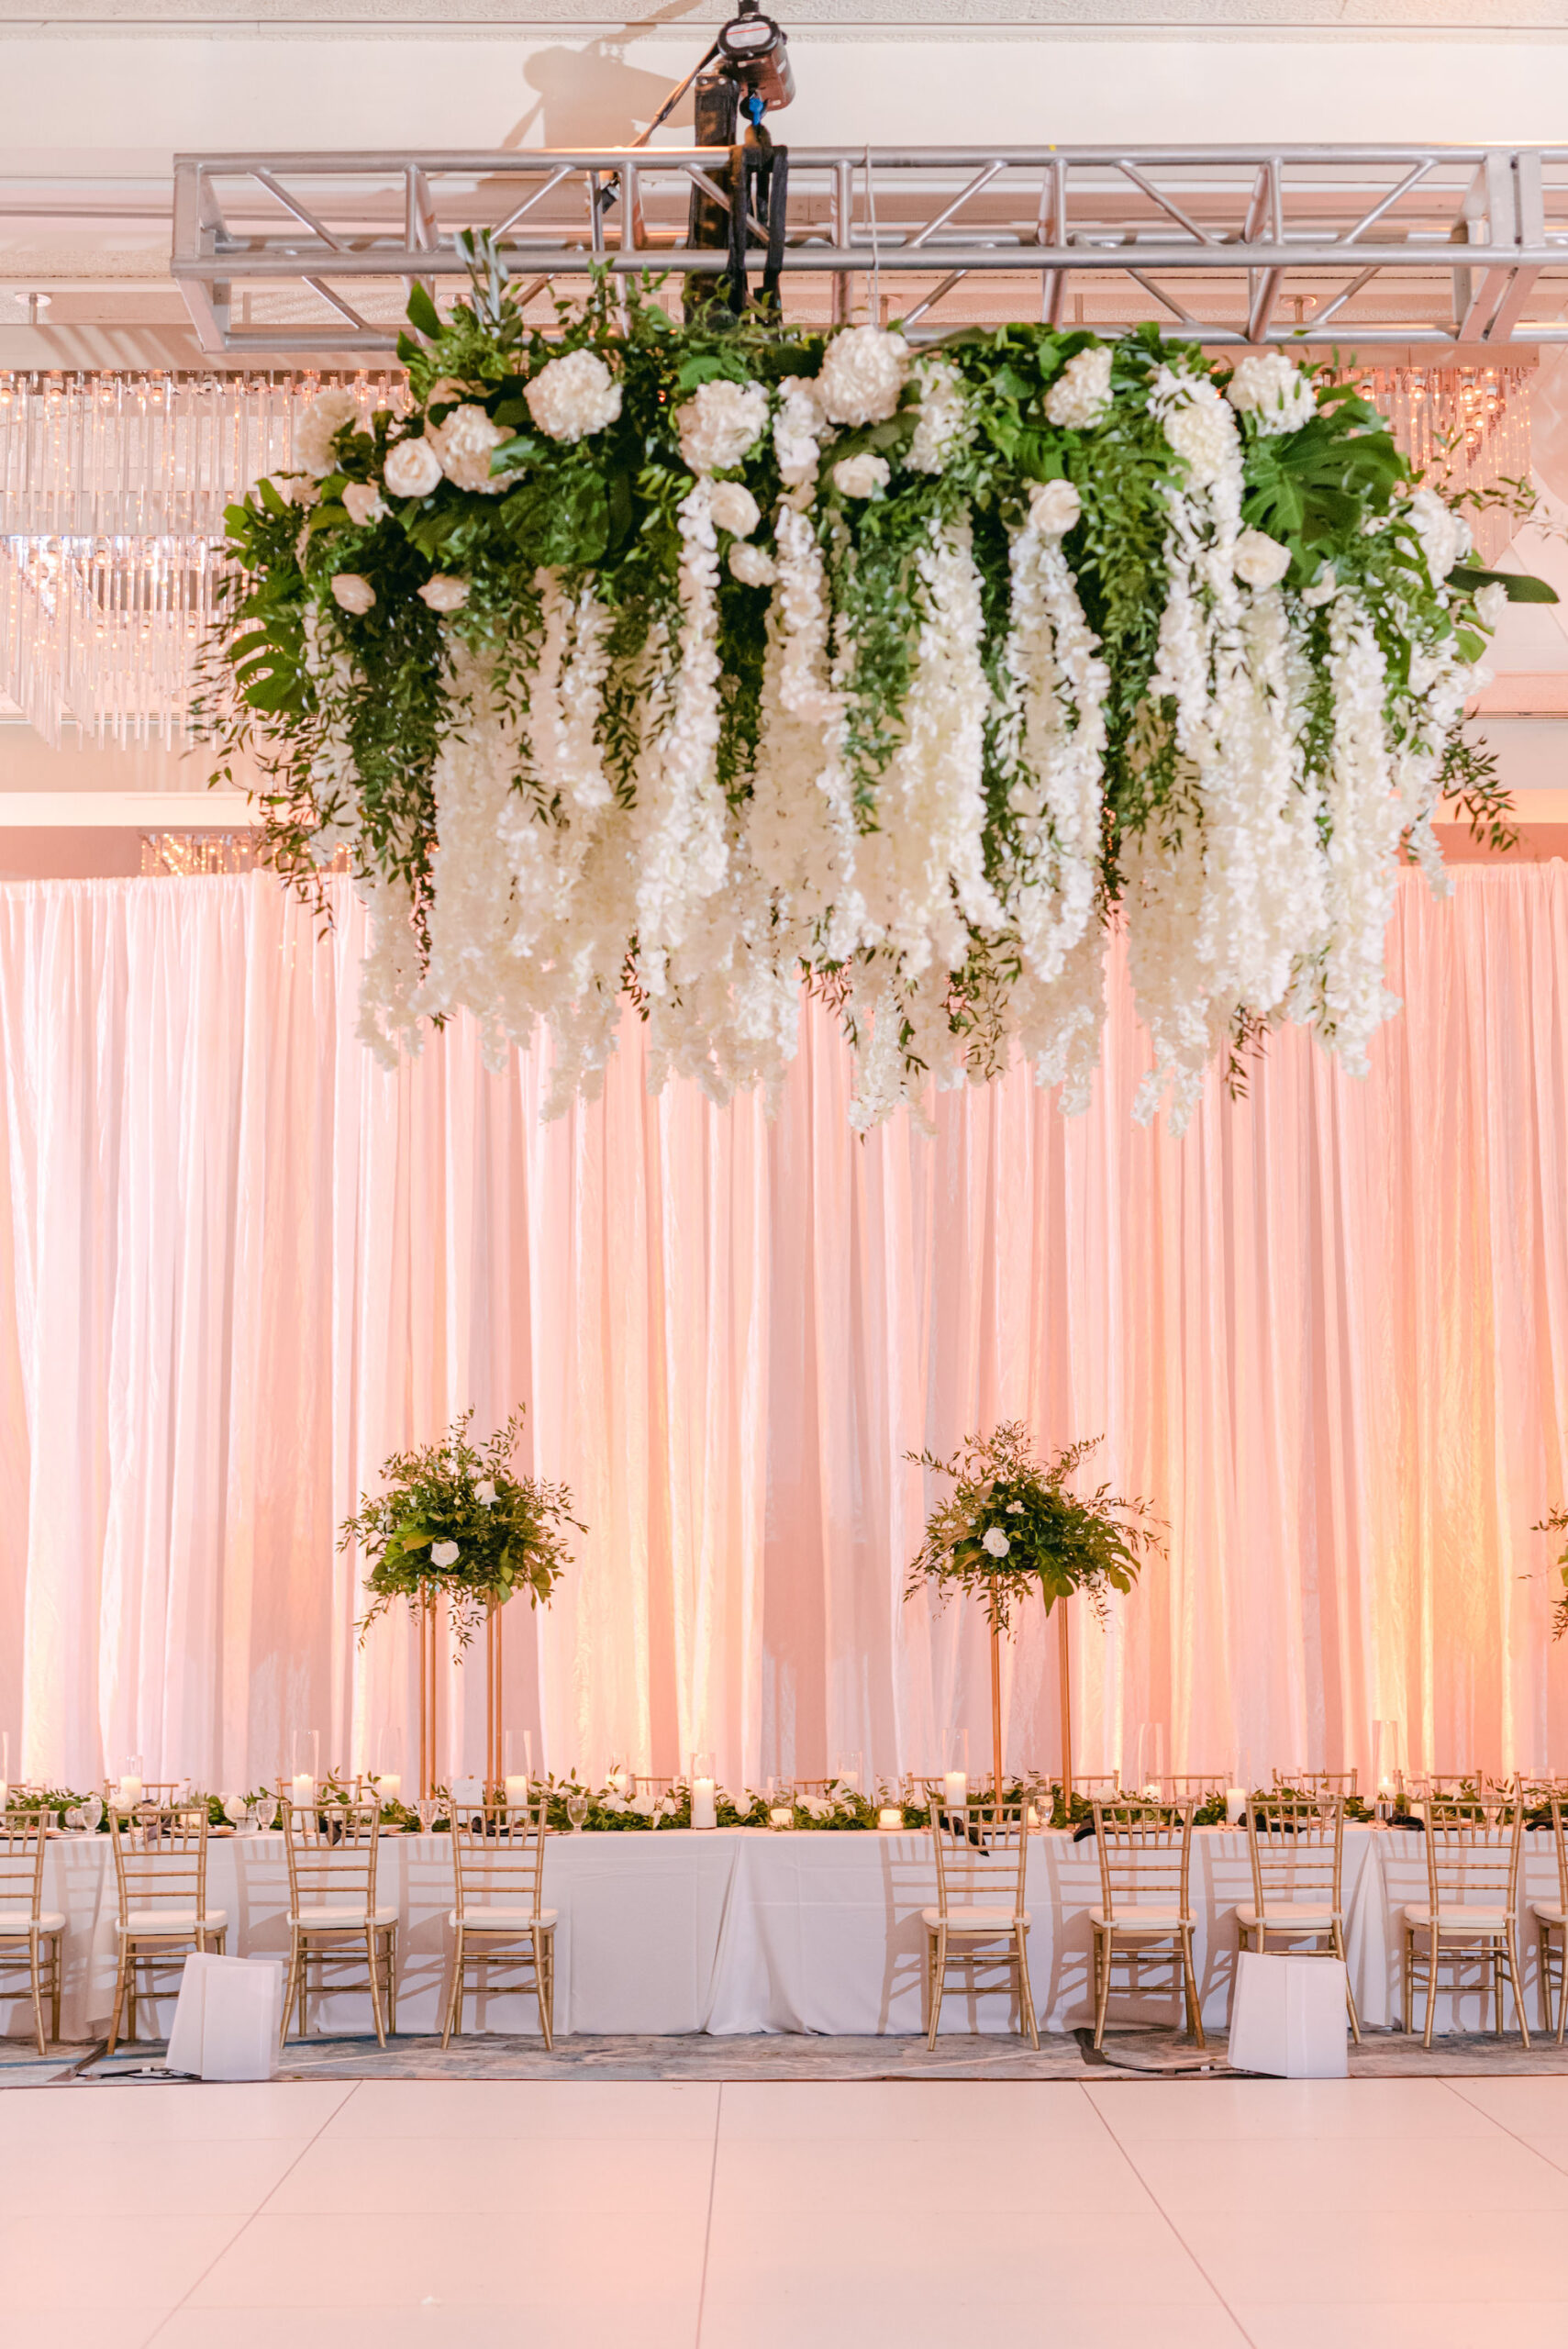 Hanging Floral Chandelier with White Draped Ballroom | Elegant Wedding Reception Decor Ideas | Tampa Wedding Florist FH Events | Venue Hilton Tampa Downtown